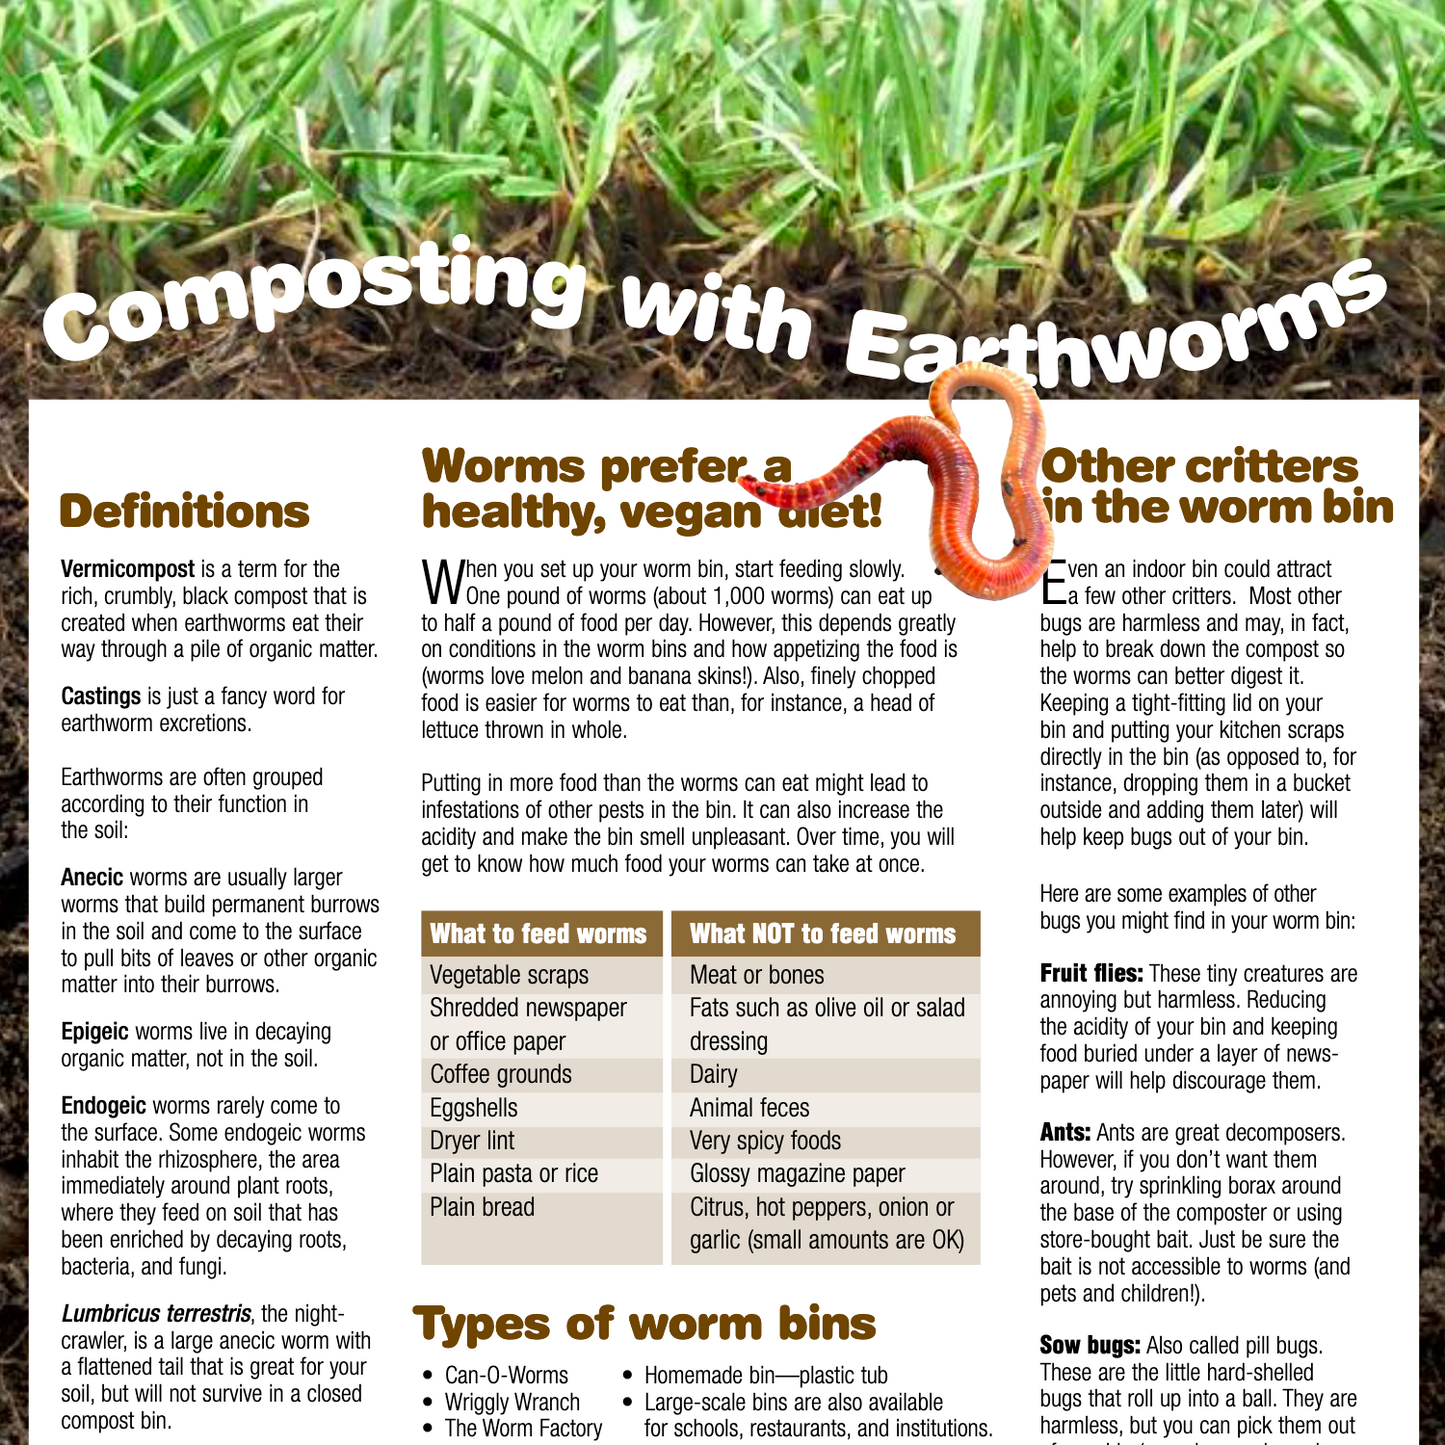 Article - Composting With Earthworms